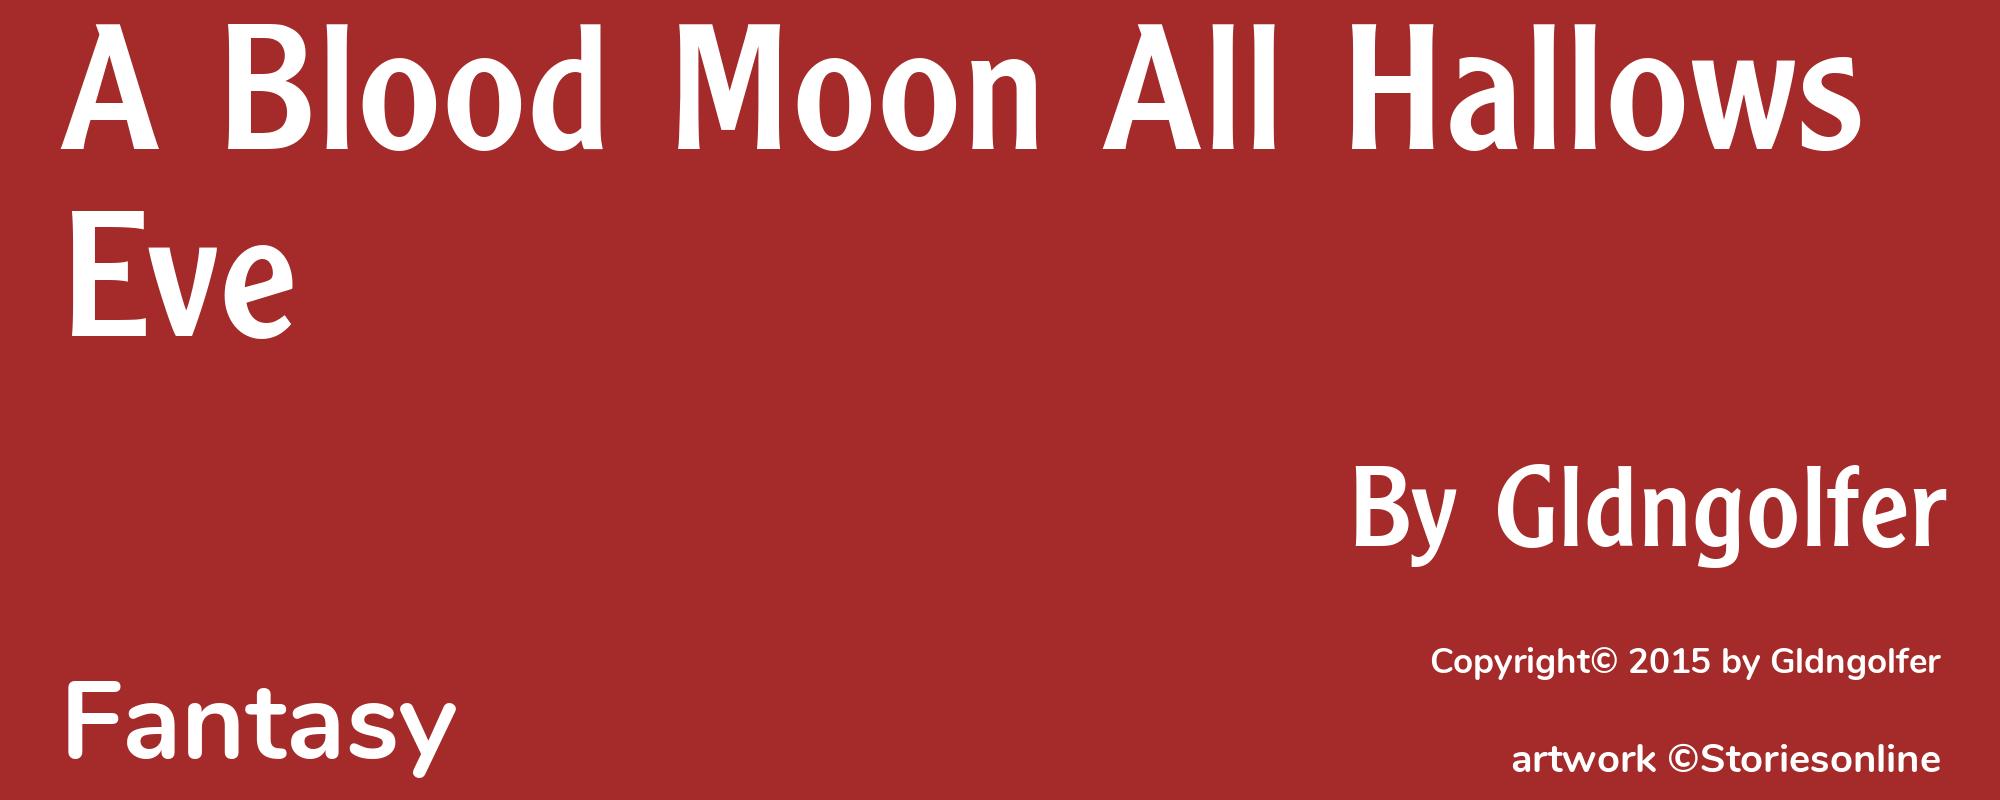 A Blood Moon All Hallows Eve - Cover